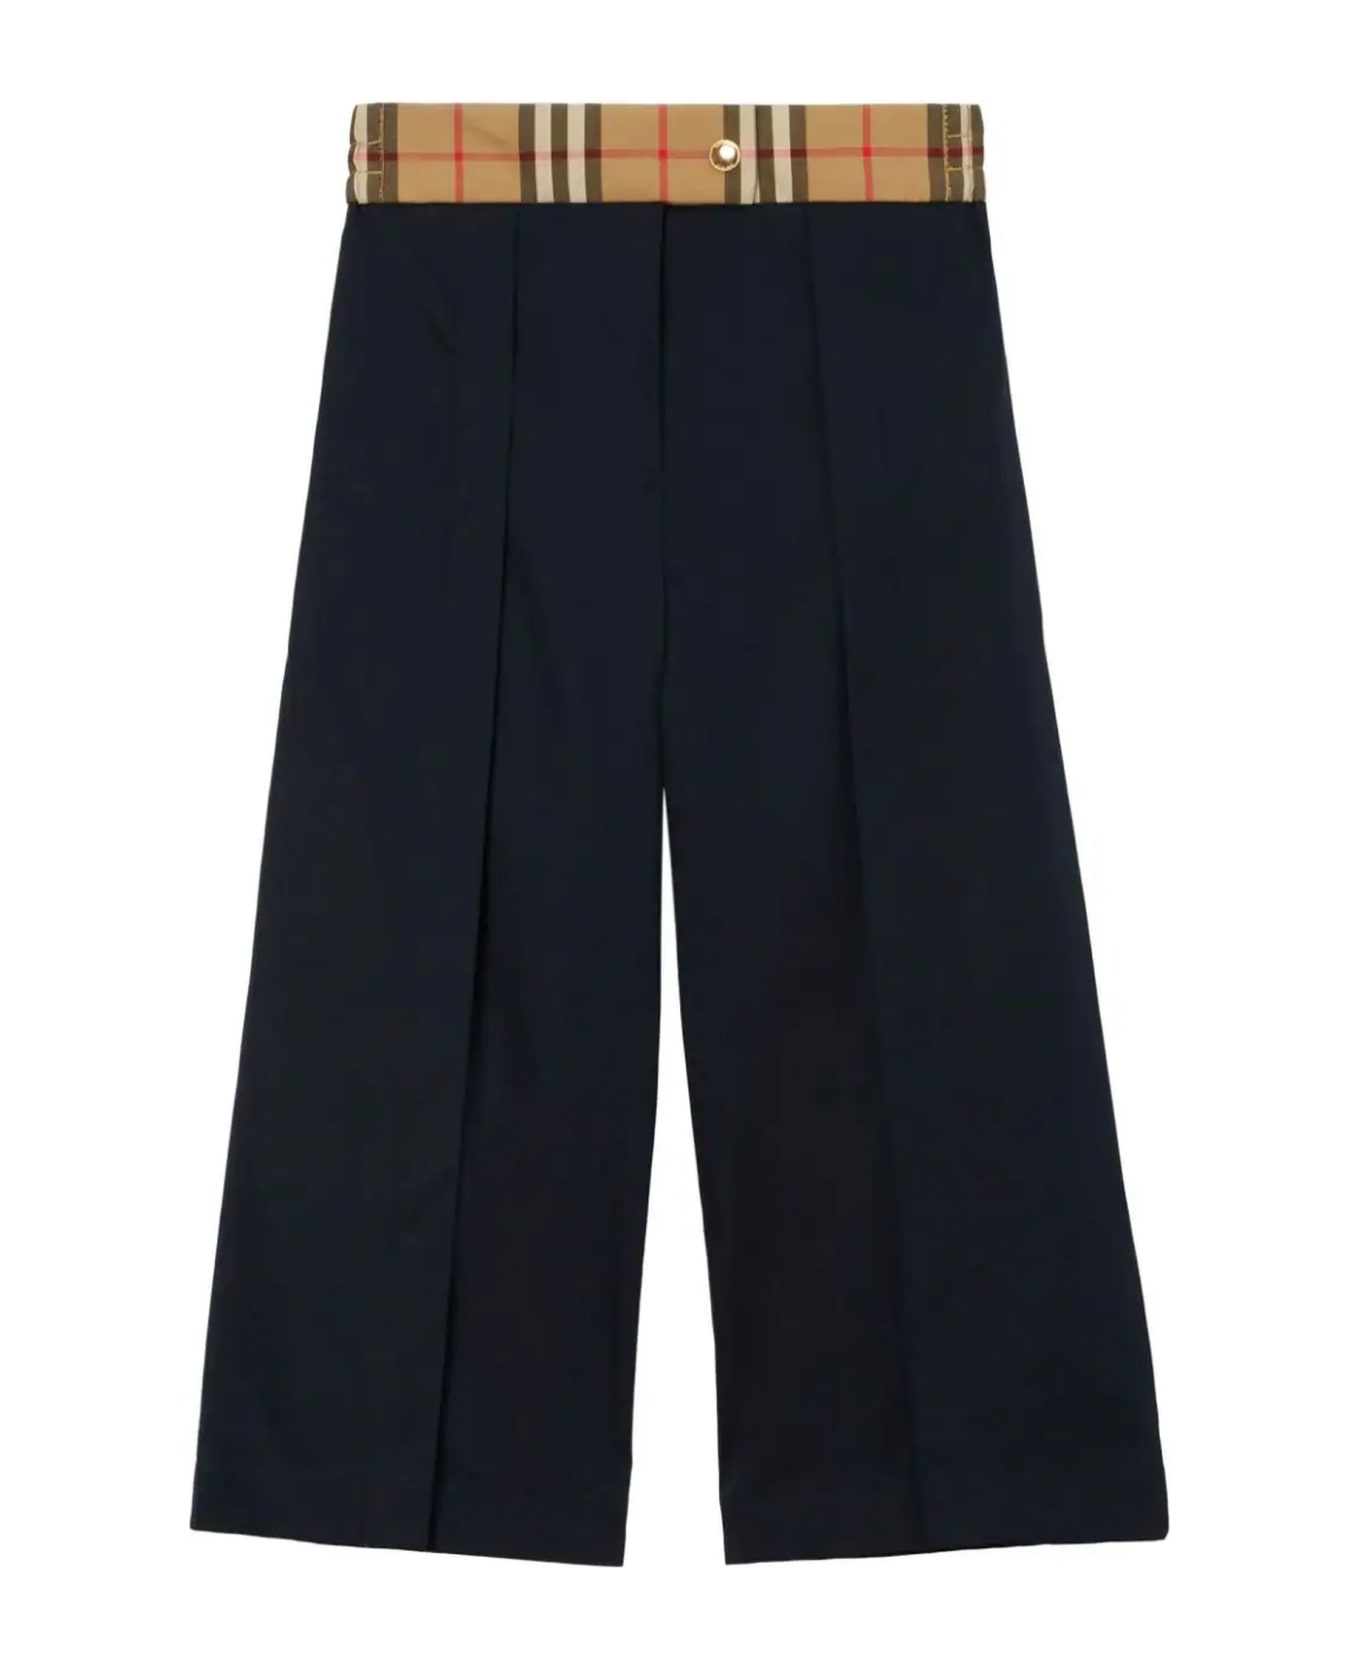 Burberry Navy Blue Cotton Trousers - Navy black ボトムス